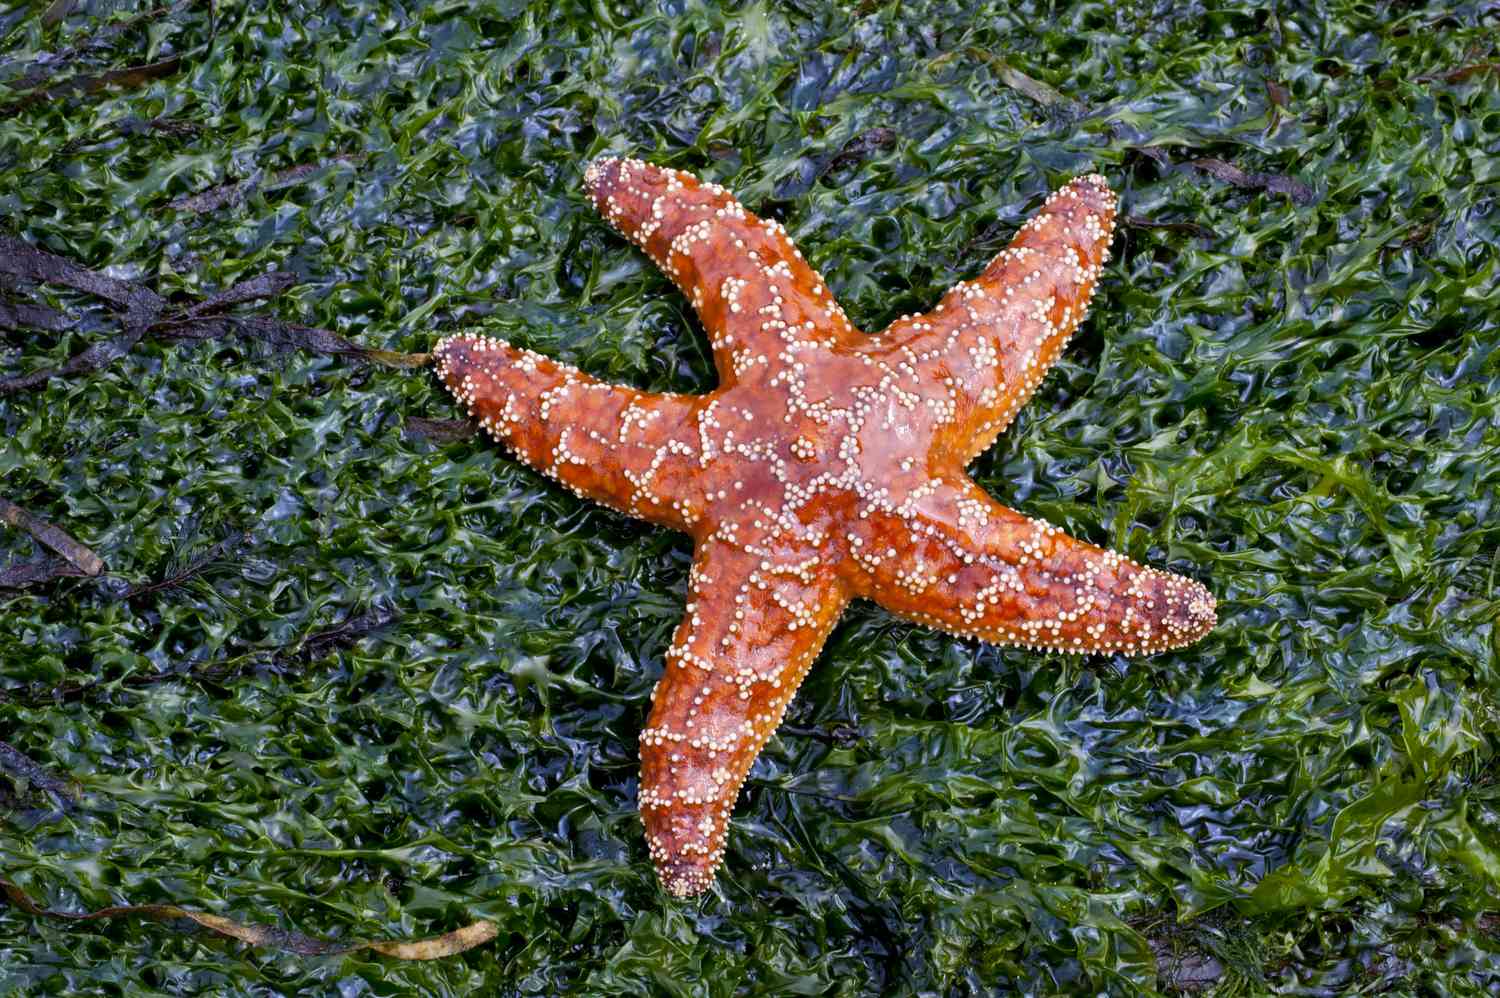  How Long Does It Take For A Starfish To Regenerate